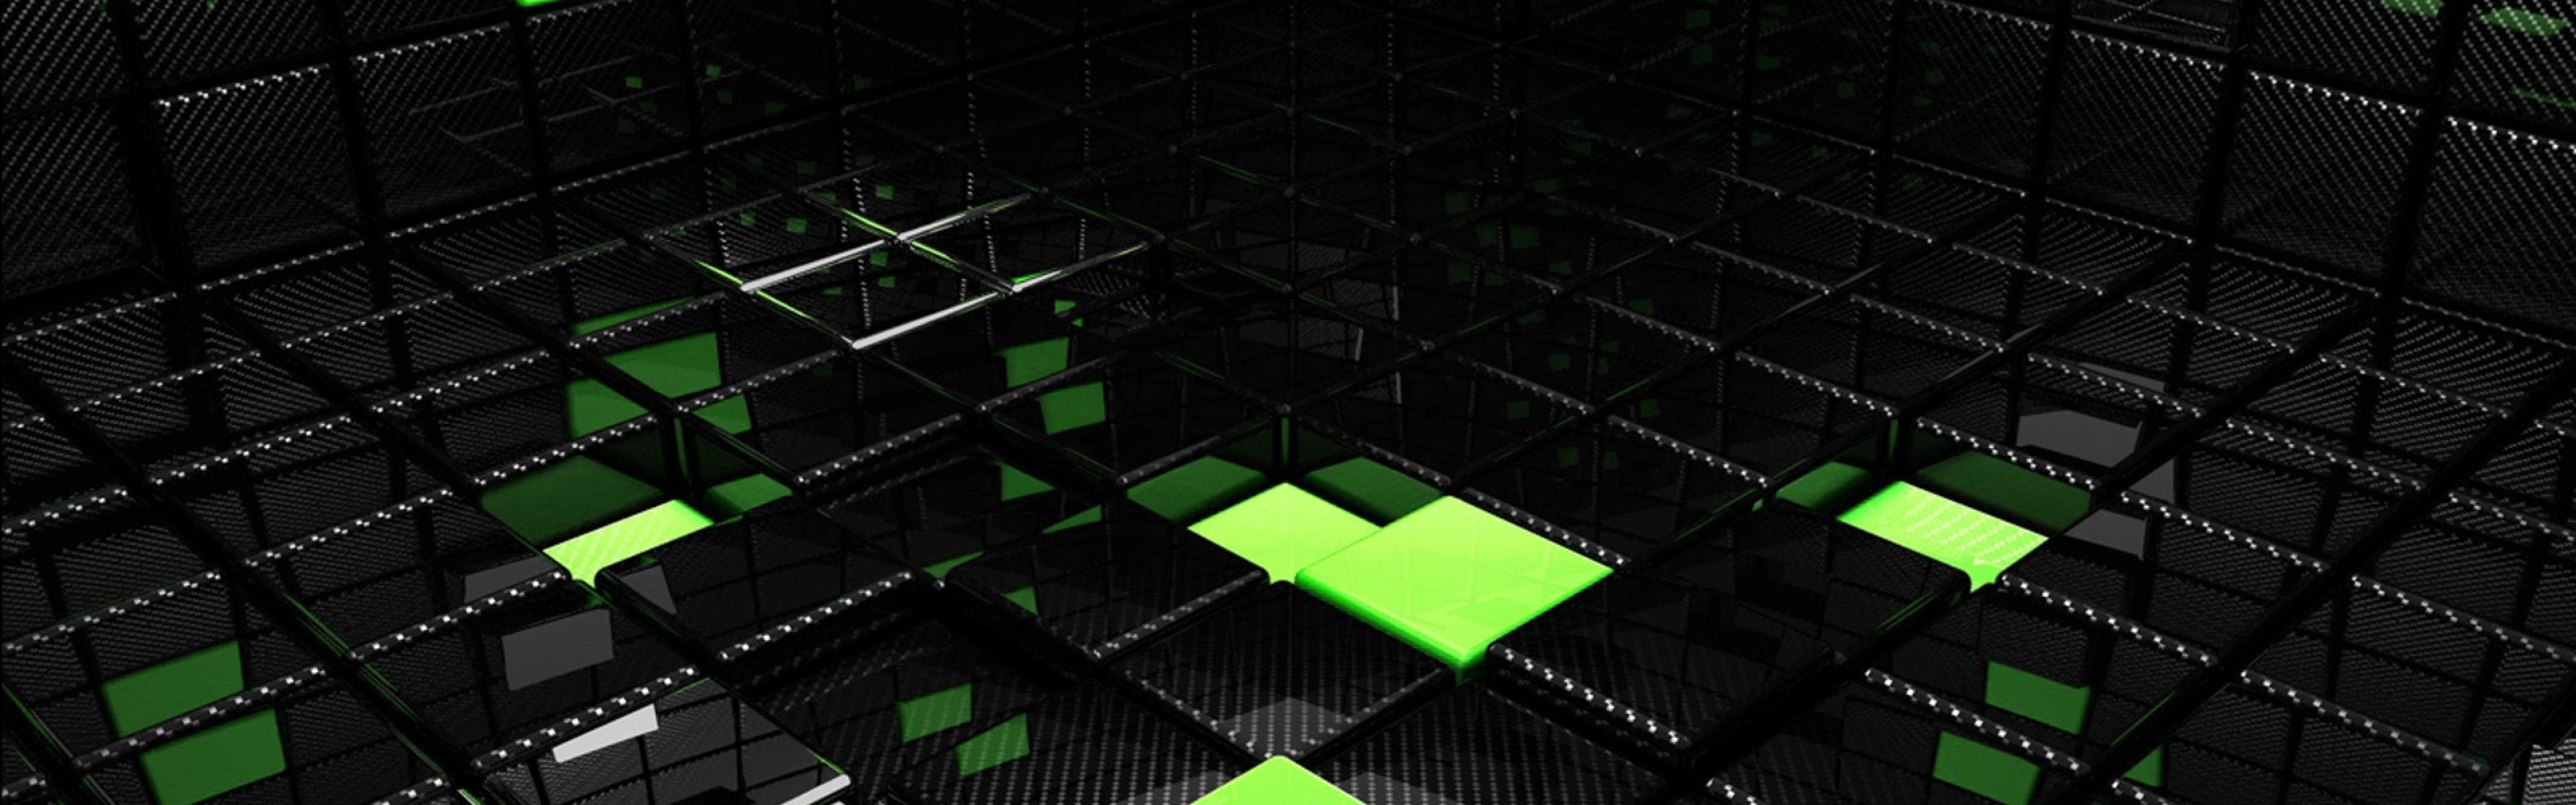 Download Wallpaper 3840x1200 Cube, Square, Green, Black, Space ...